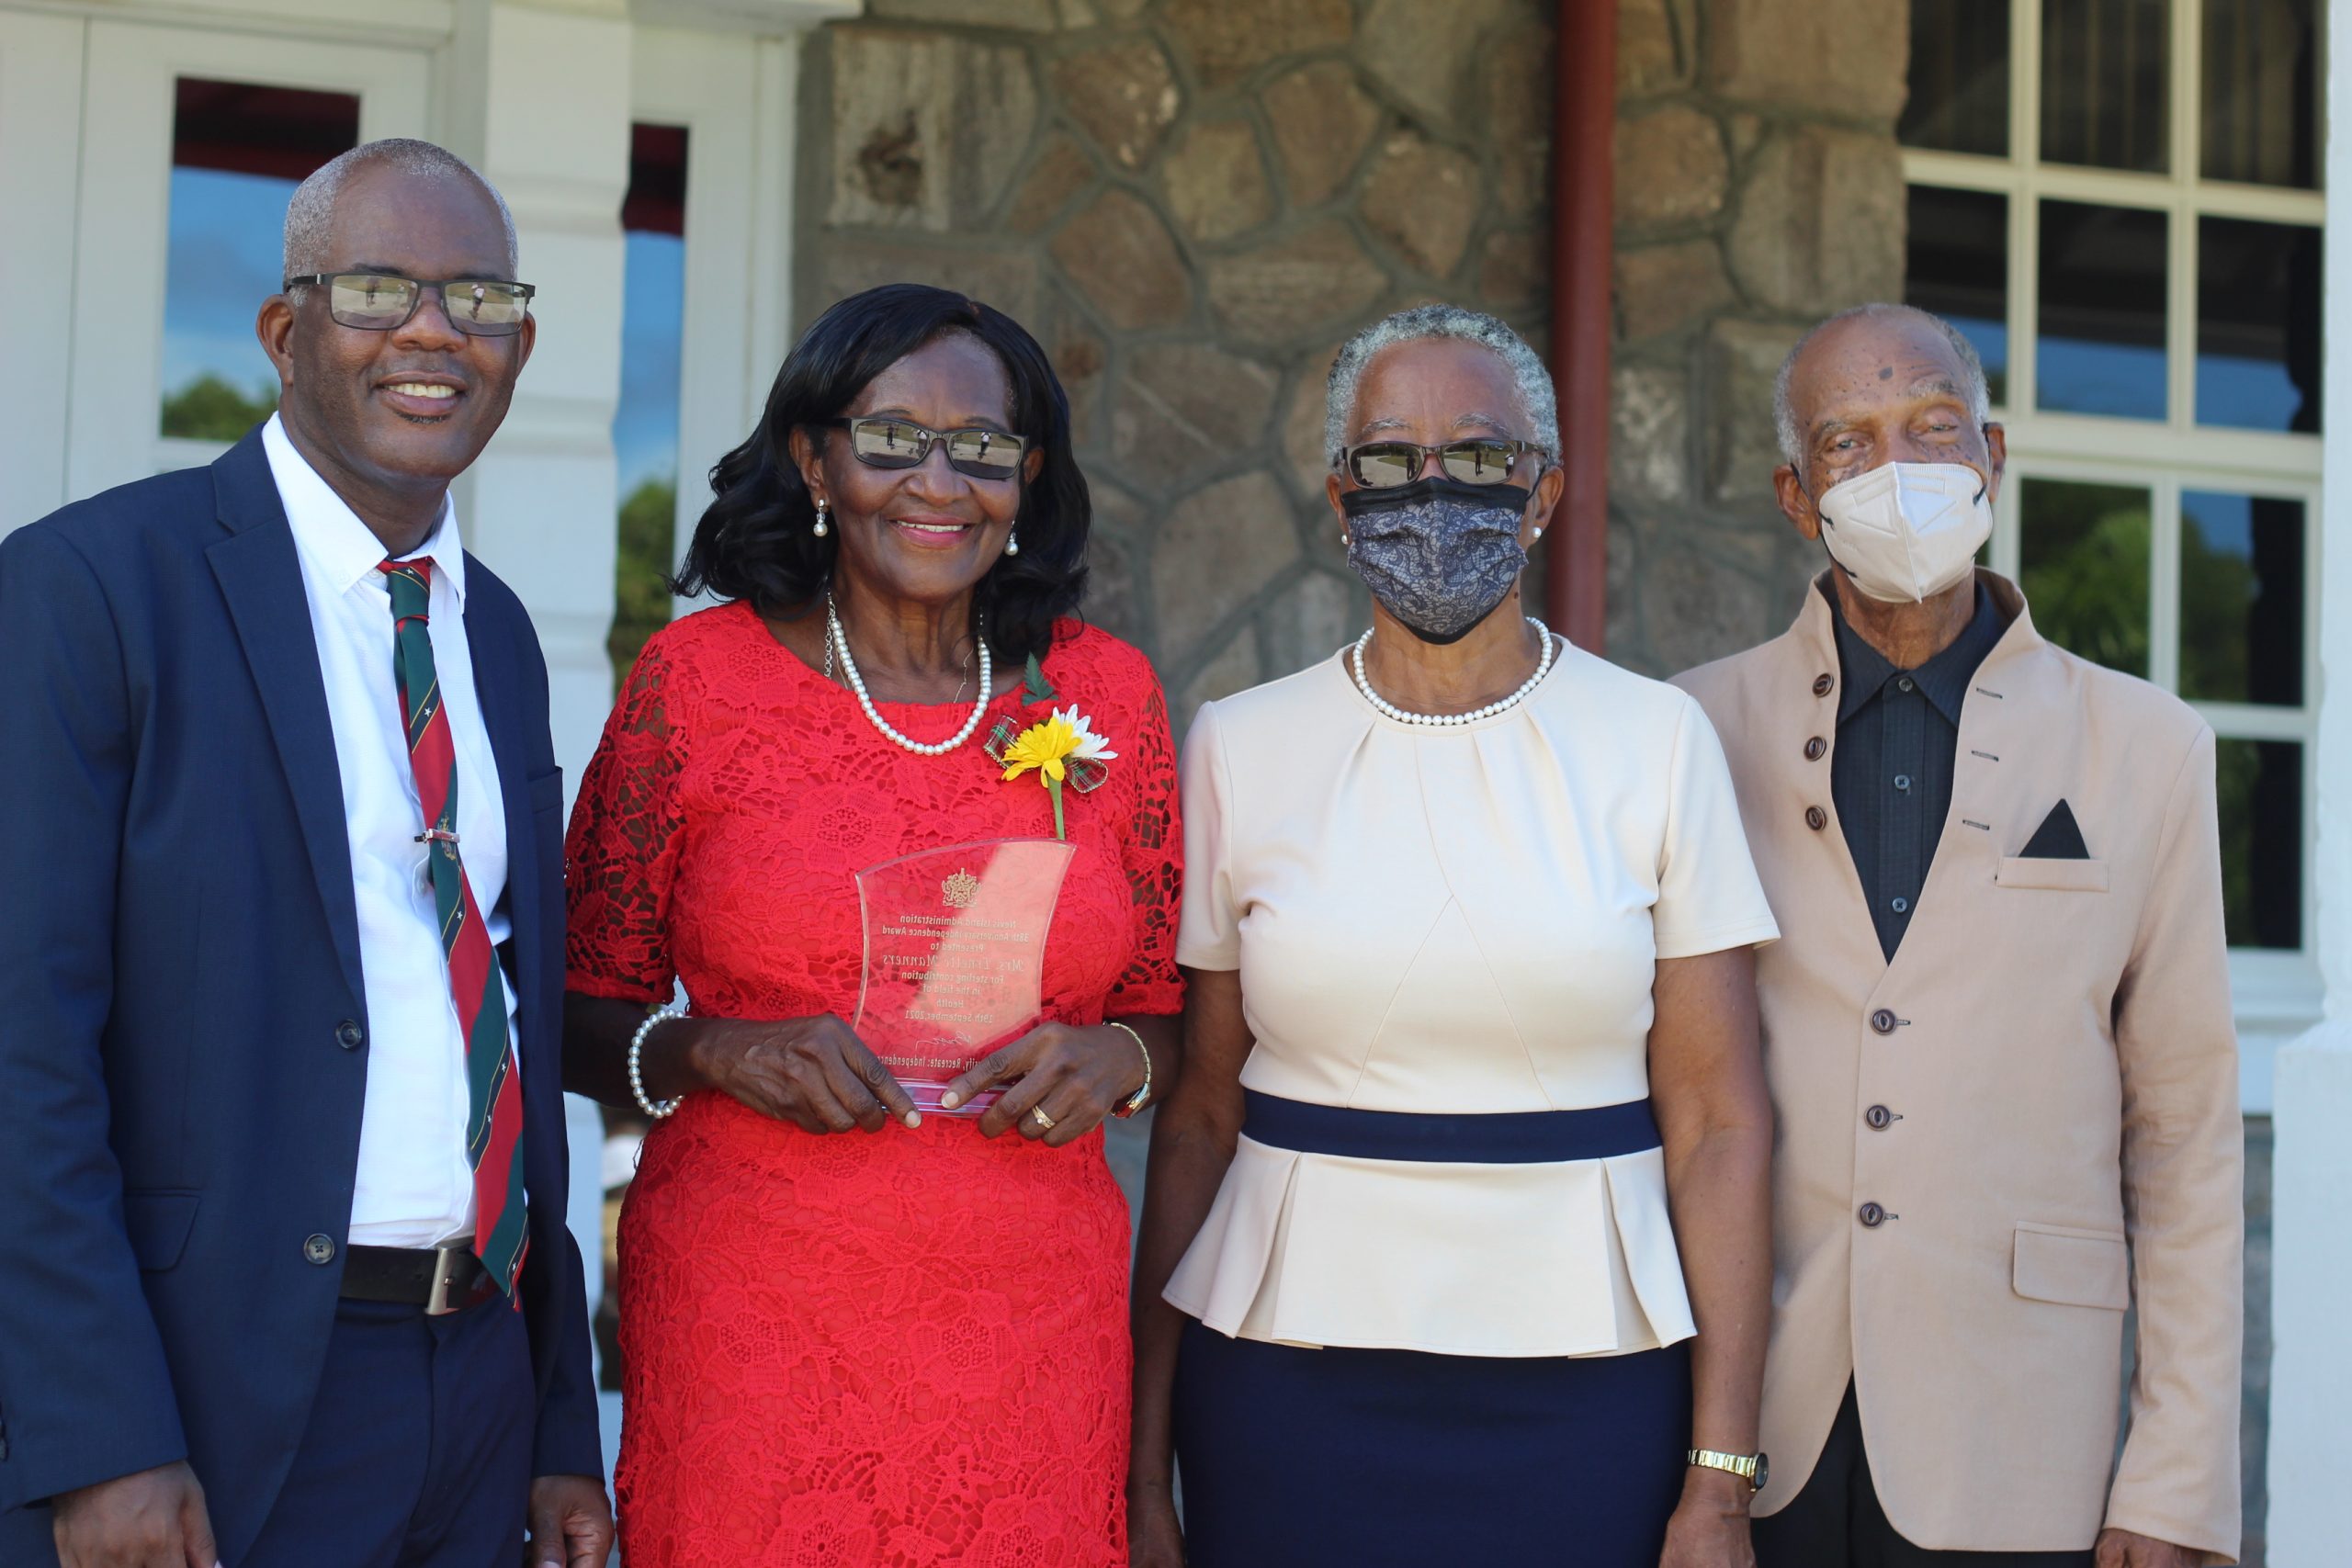 Independence Day honouree retired registered nurse Mrs. Ernette Manners (second from left) showing off her award flanked by her brother Mr. Oral Brandy (left) and Her Honour Mrs. Hyleeta Liburd, Deputy Governor General on Nevis, (second from right) and her husband following an awards ceremony at Government House on September 20, 2021